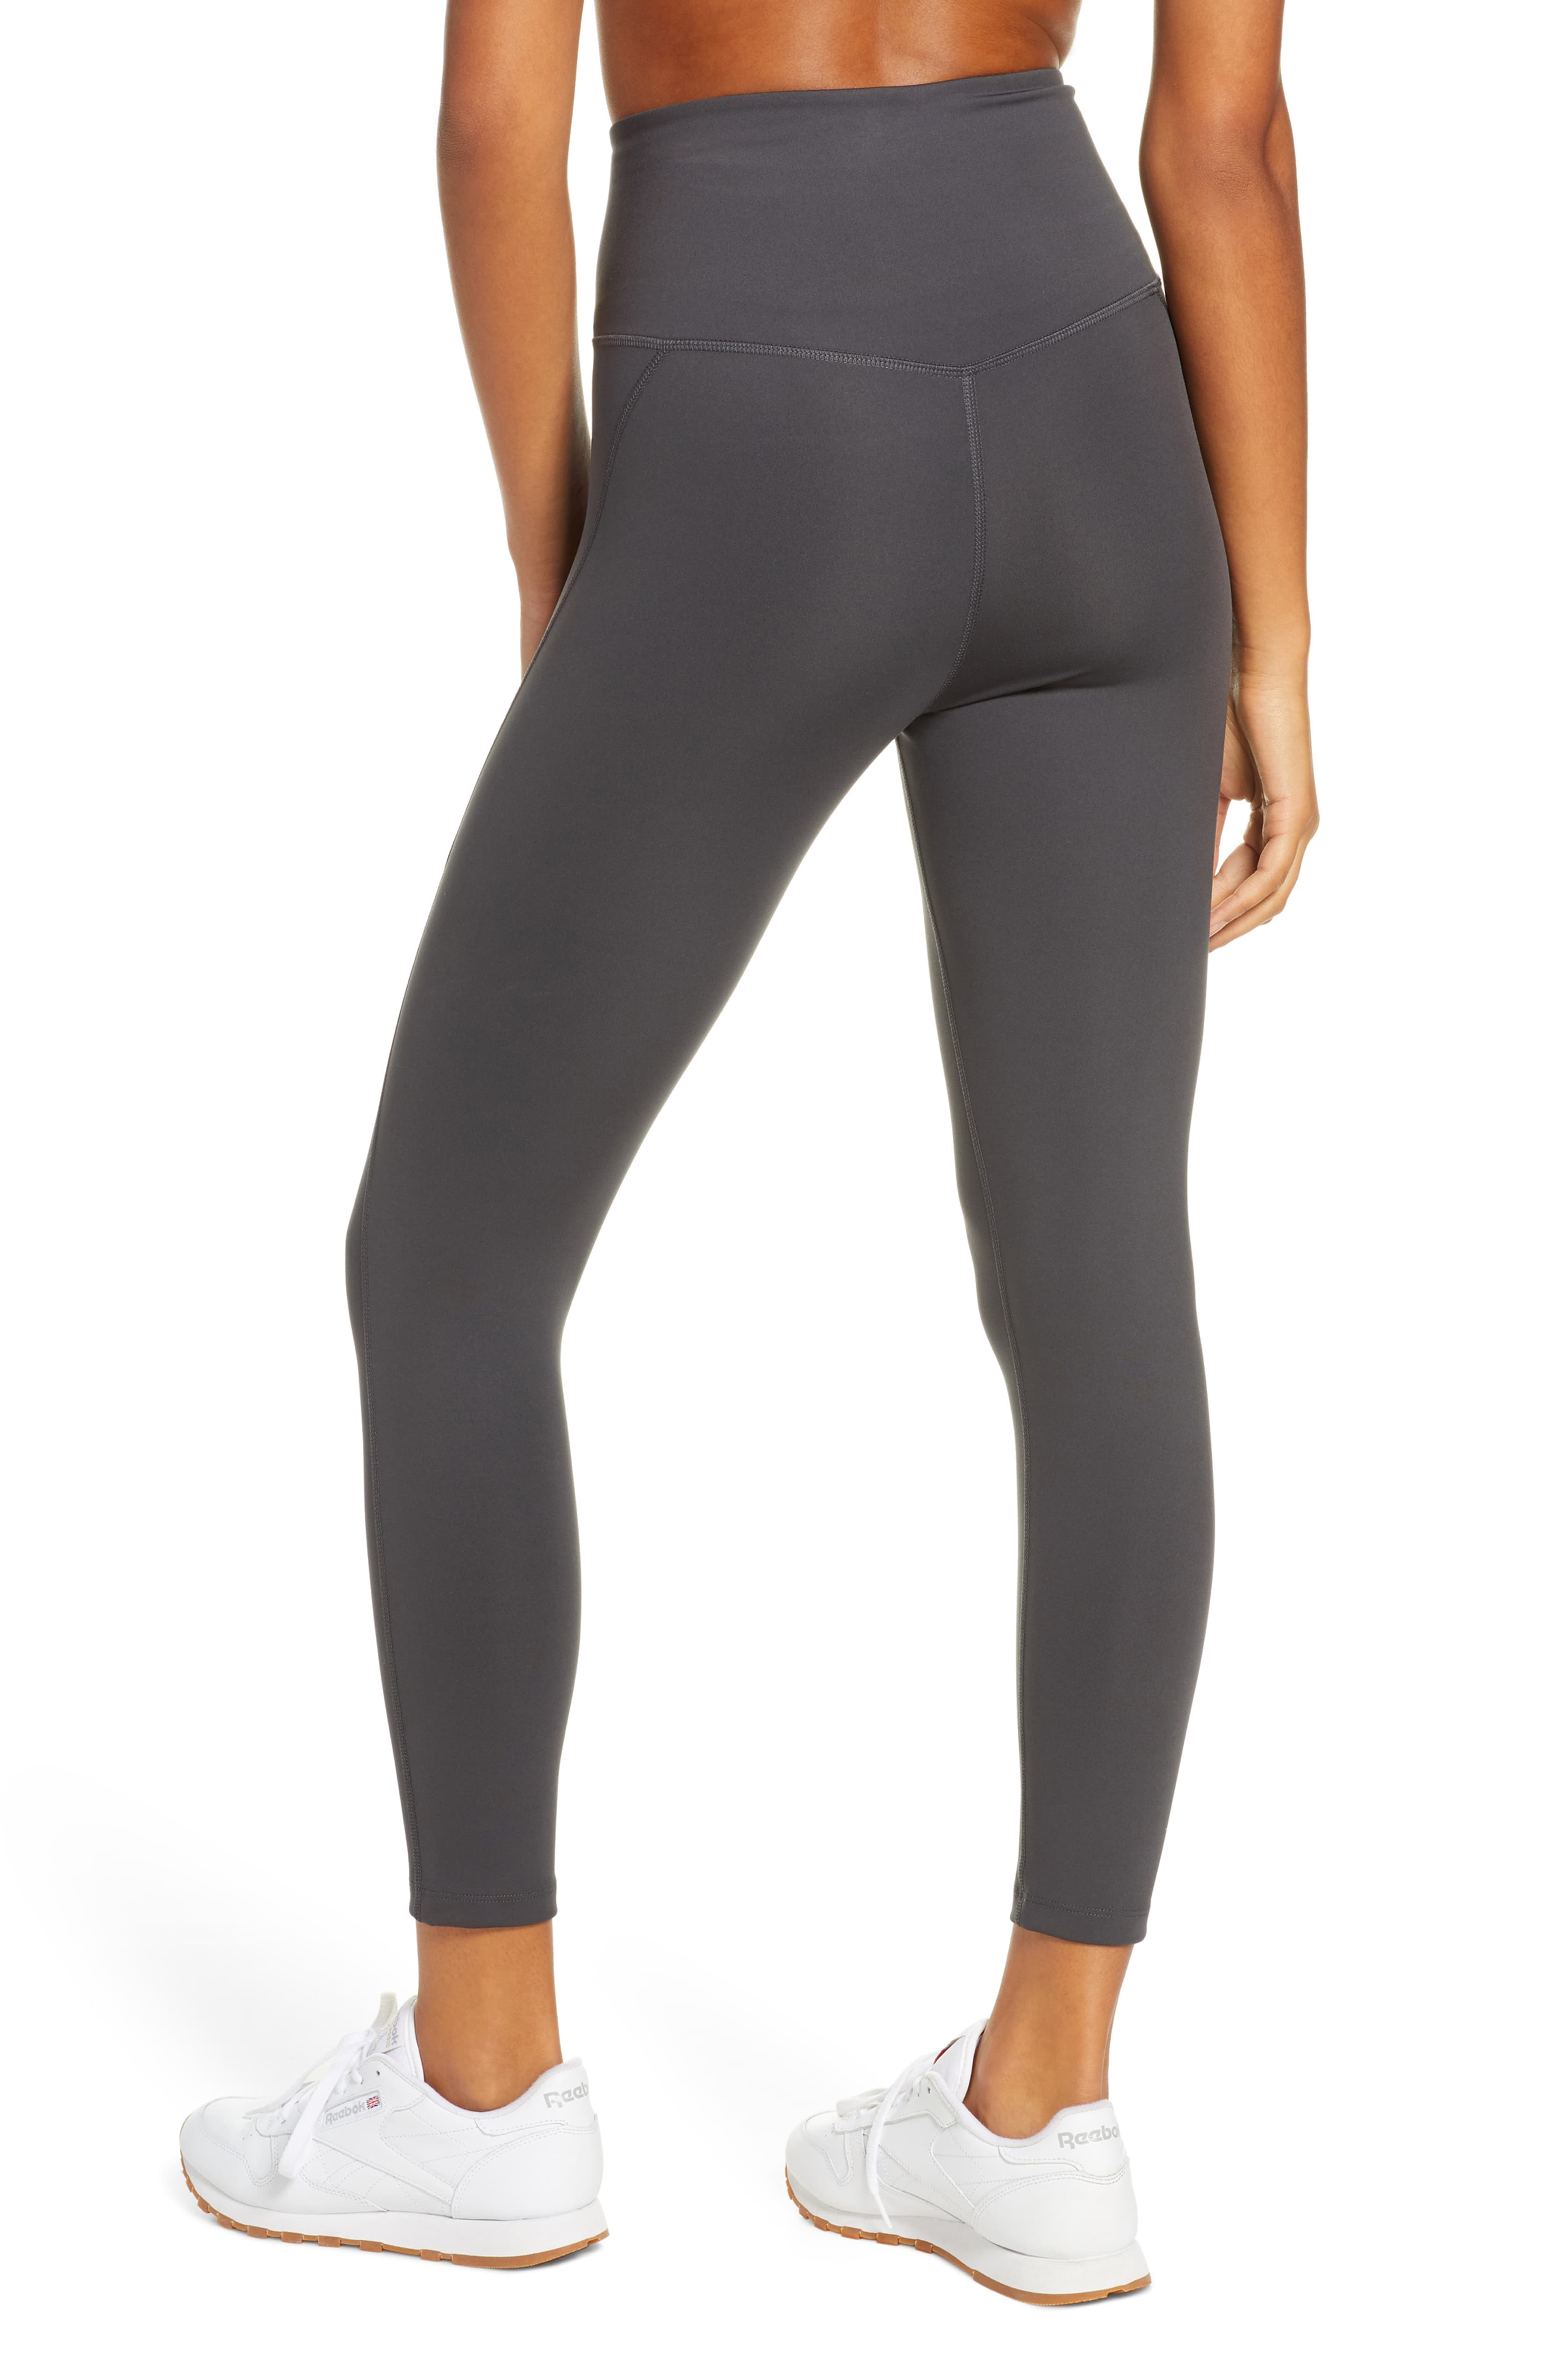 what colour leggings are most flattering meaning